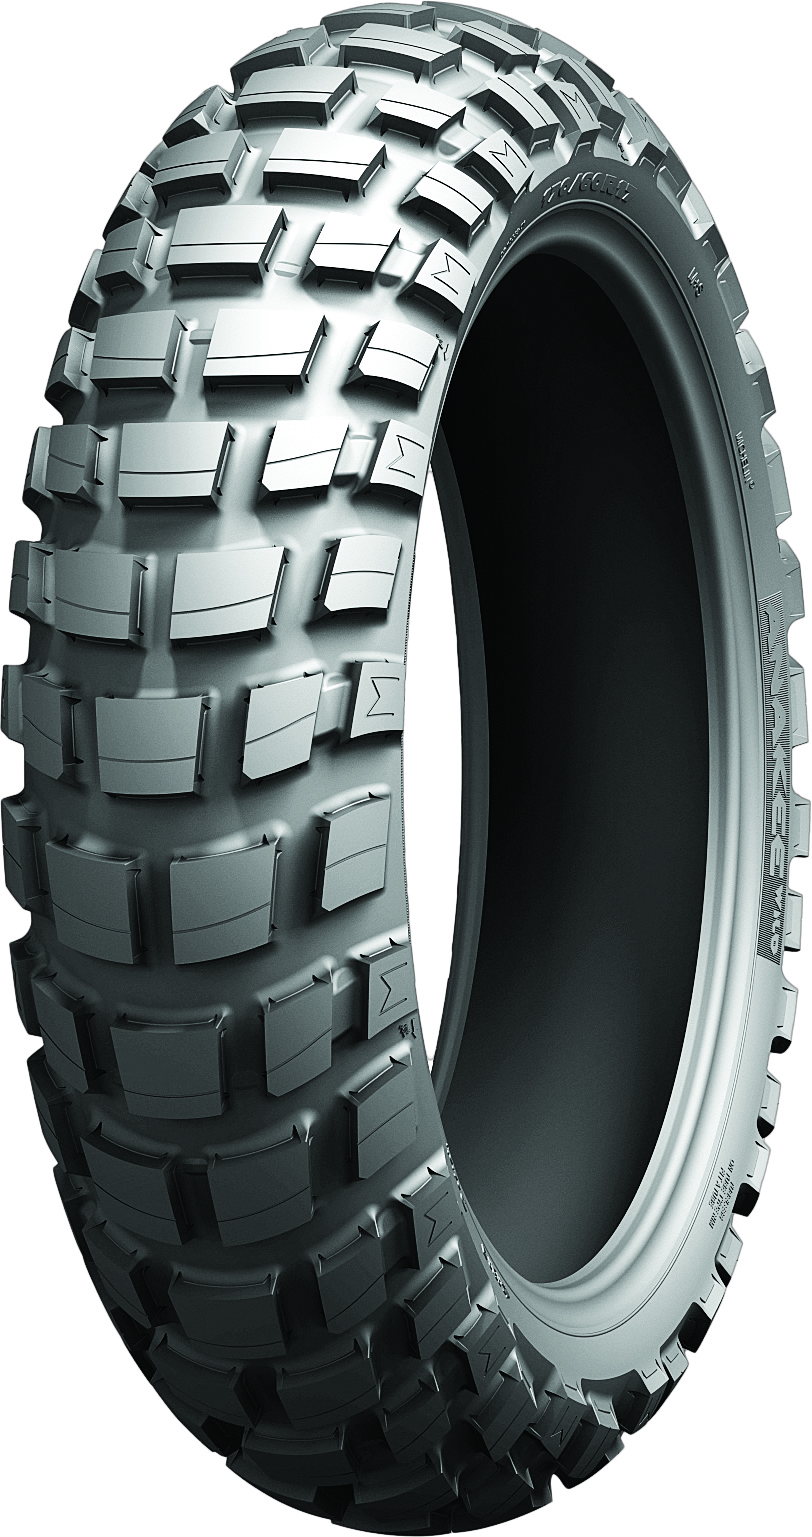 130/80-18 66S Anakee Wild Rear Motorcycle Tire TT - Click Image to Close